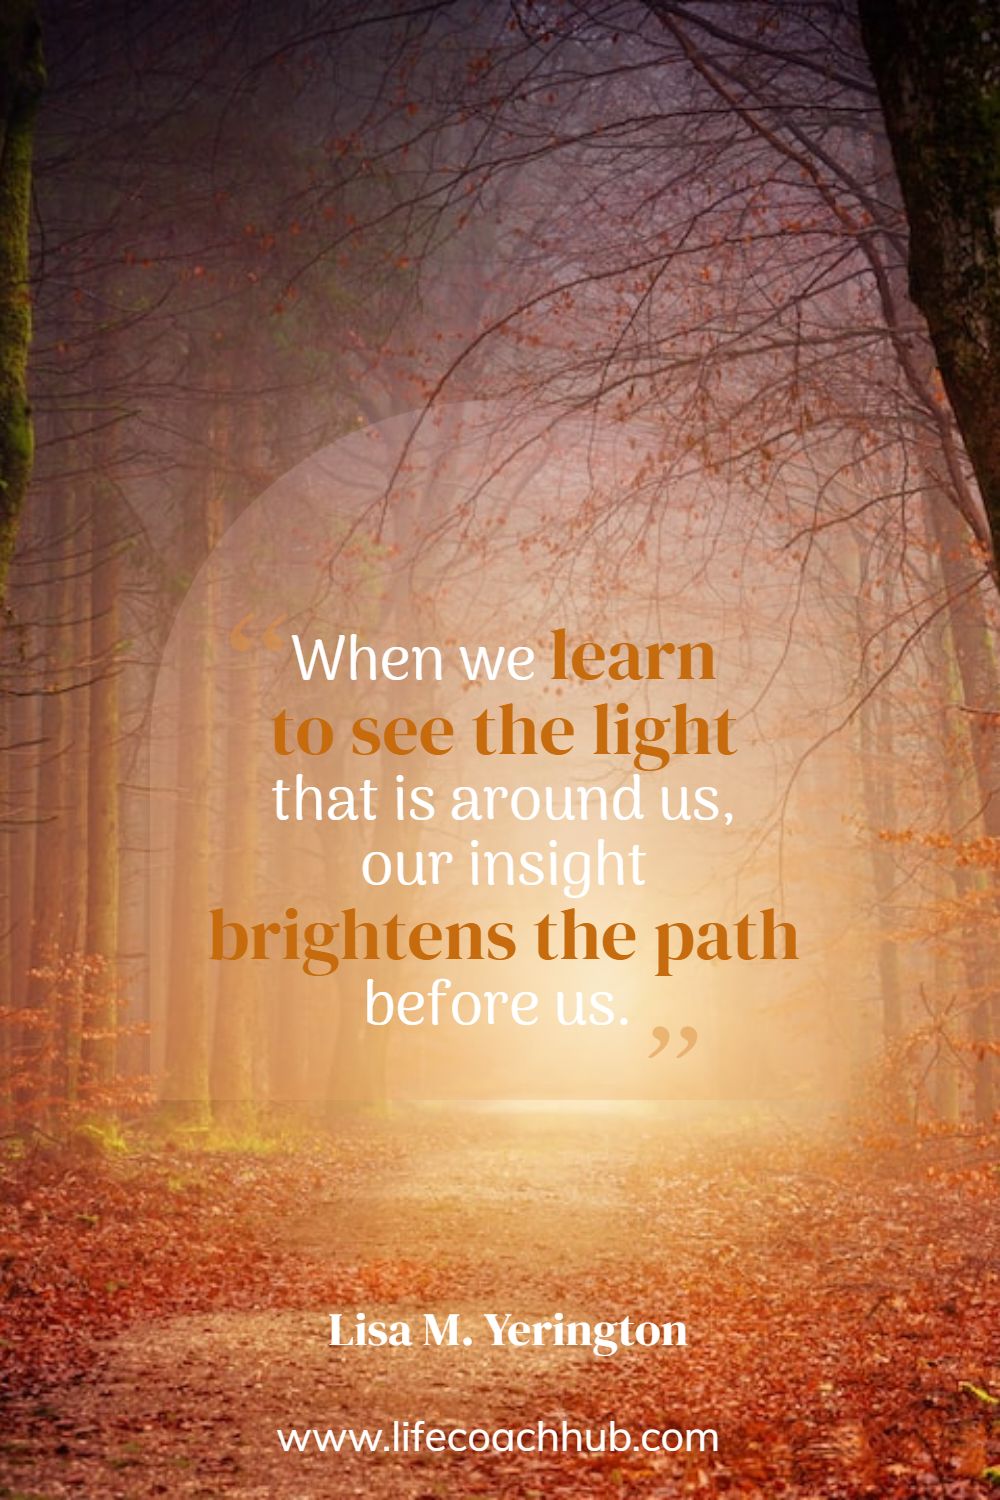 When we learn to see the light that is around us, our insight brightens the path before us. Lisa M. Yerington Coaching Quote